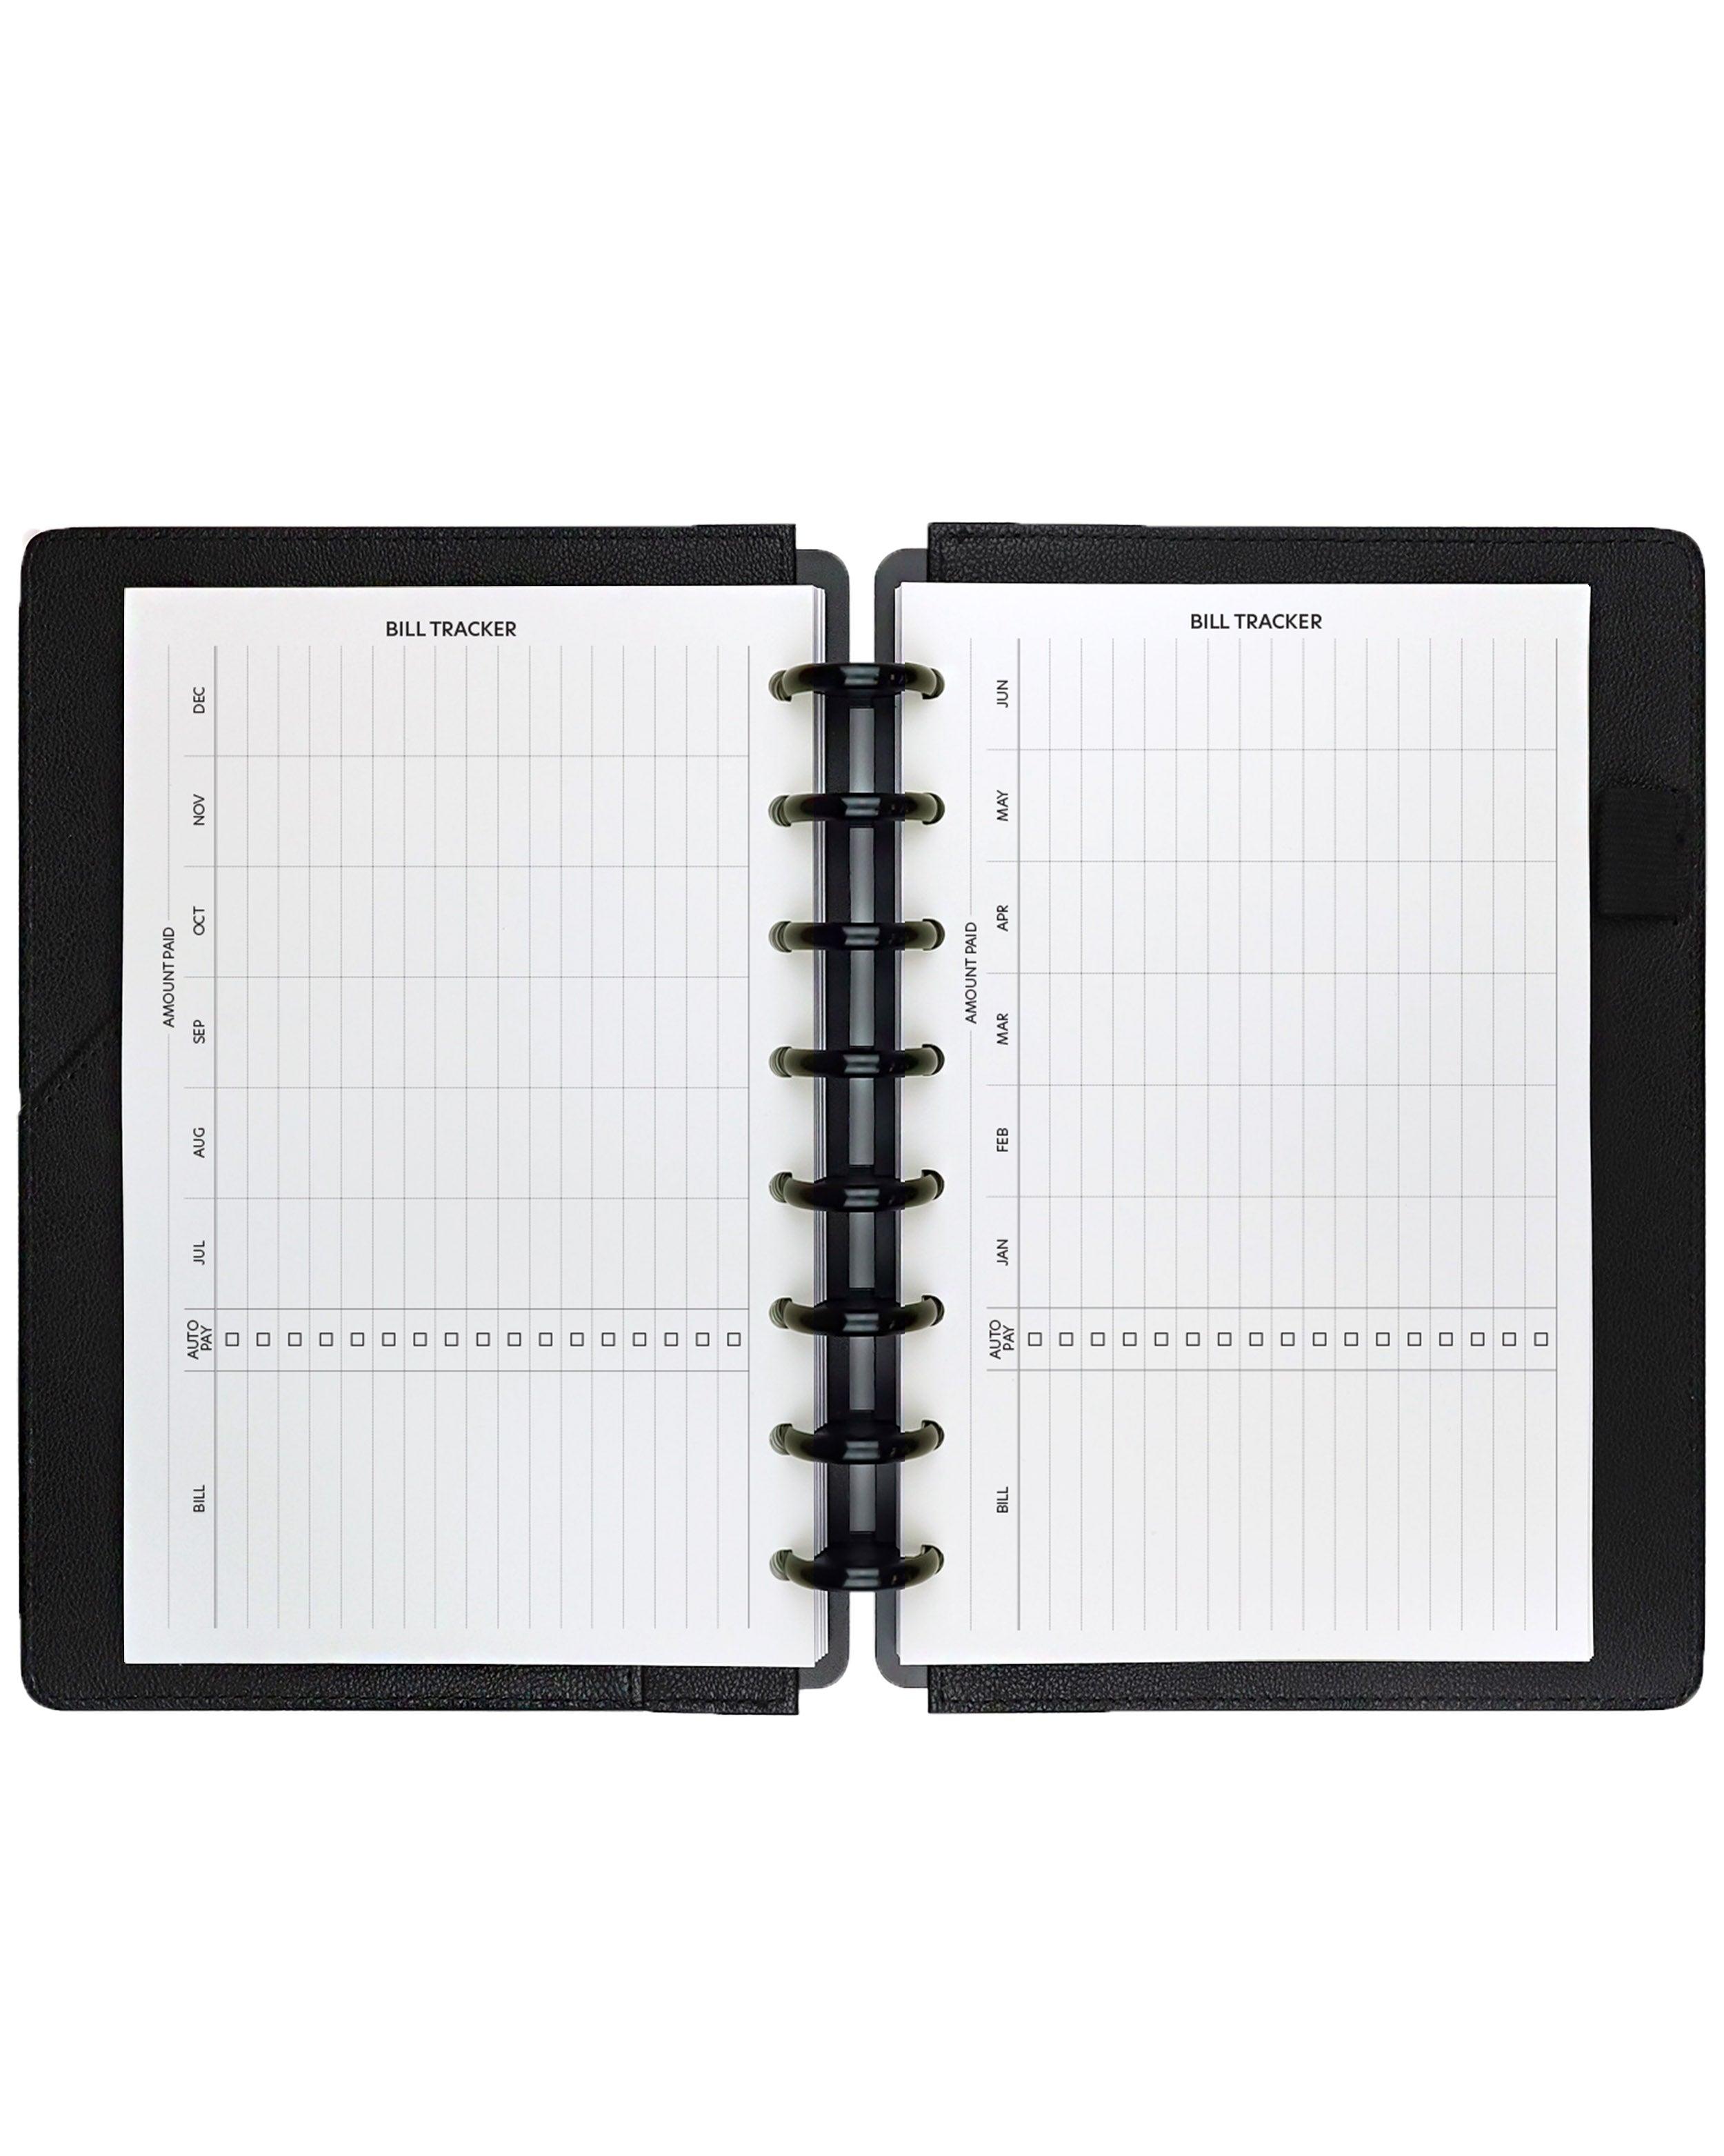 Recurring bills planner inserts refill pages for discbound and ringbound planners and notebooks by Jane's Agenda.